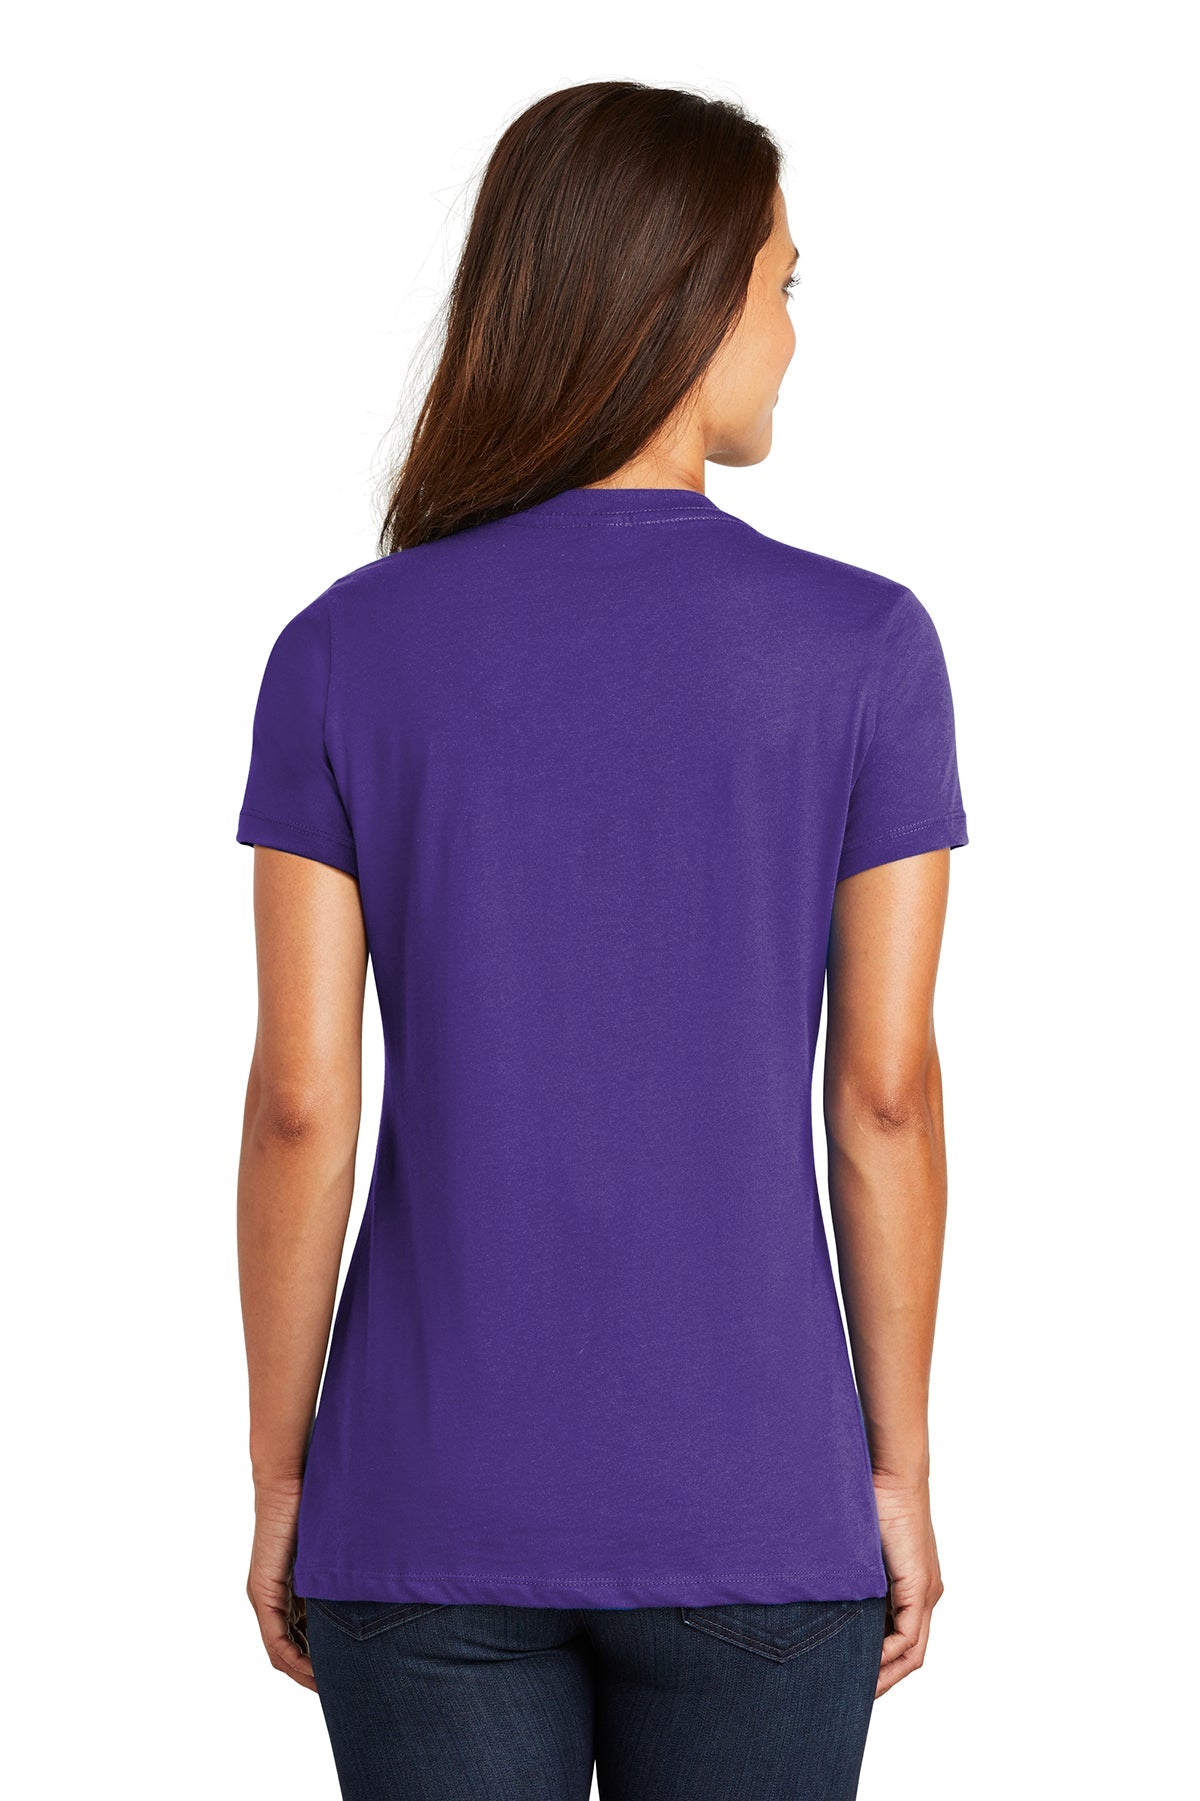 District Made - Ladies Perfect Weight V-Neck Tee